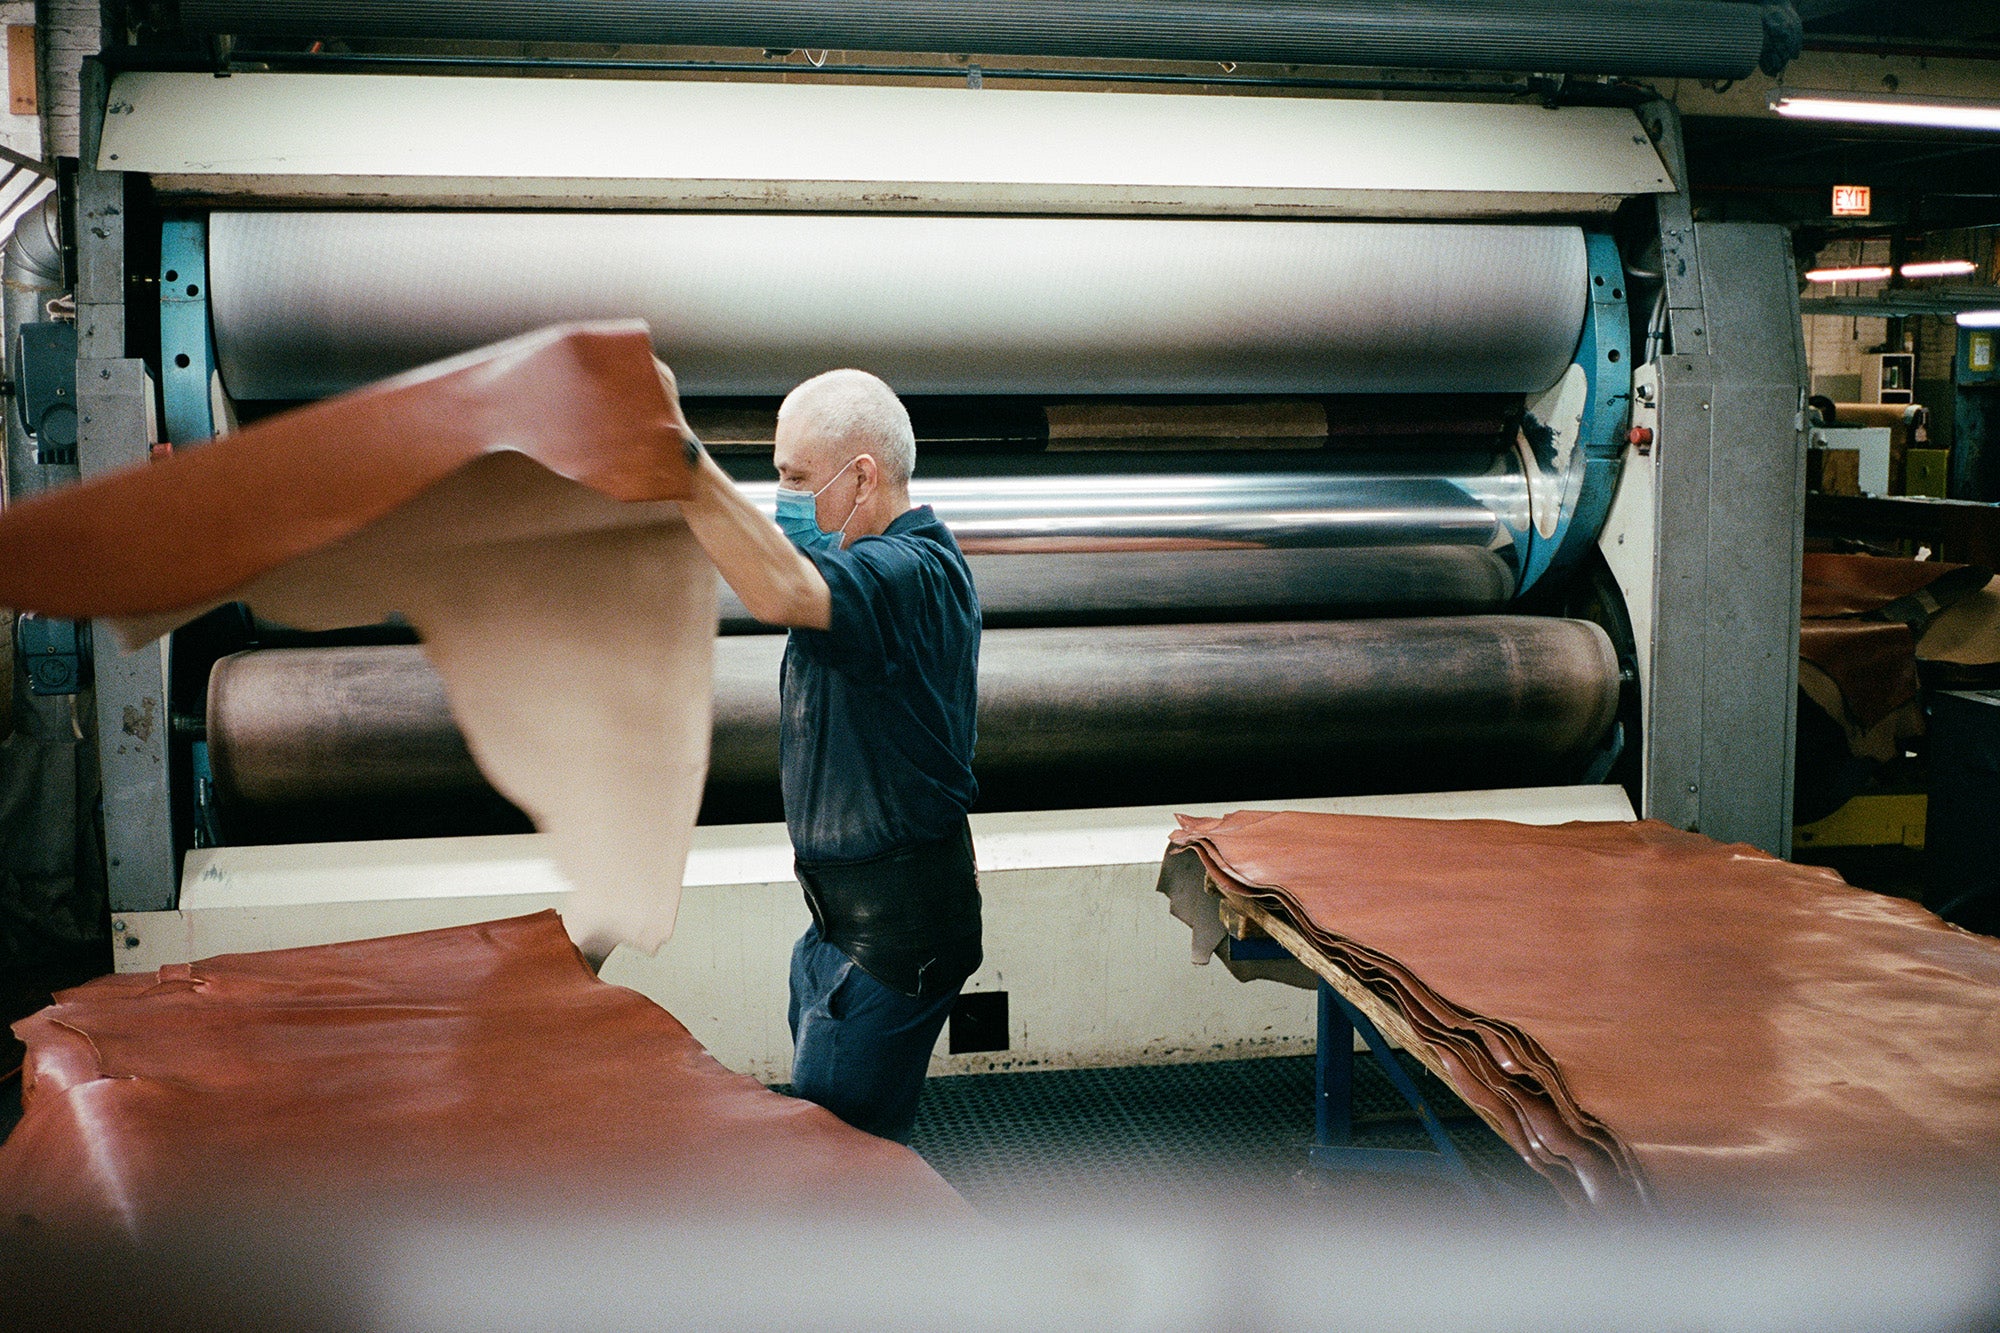 A man processes leather in a factory.